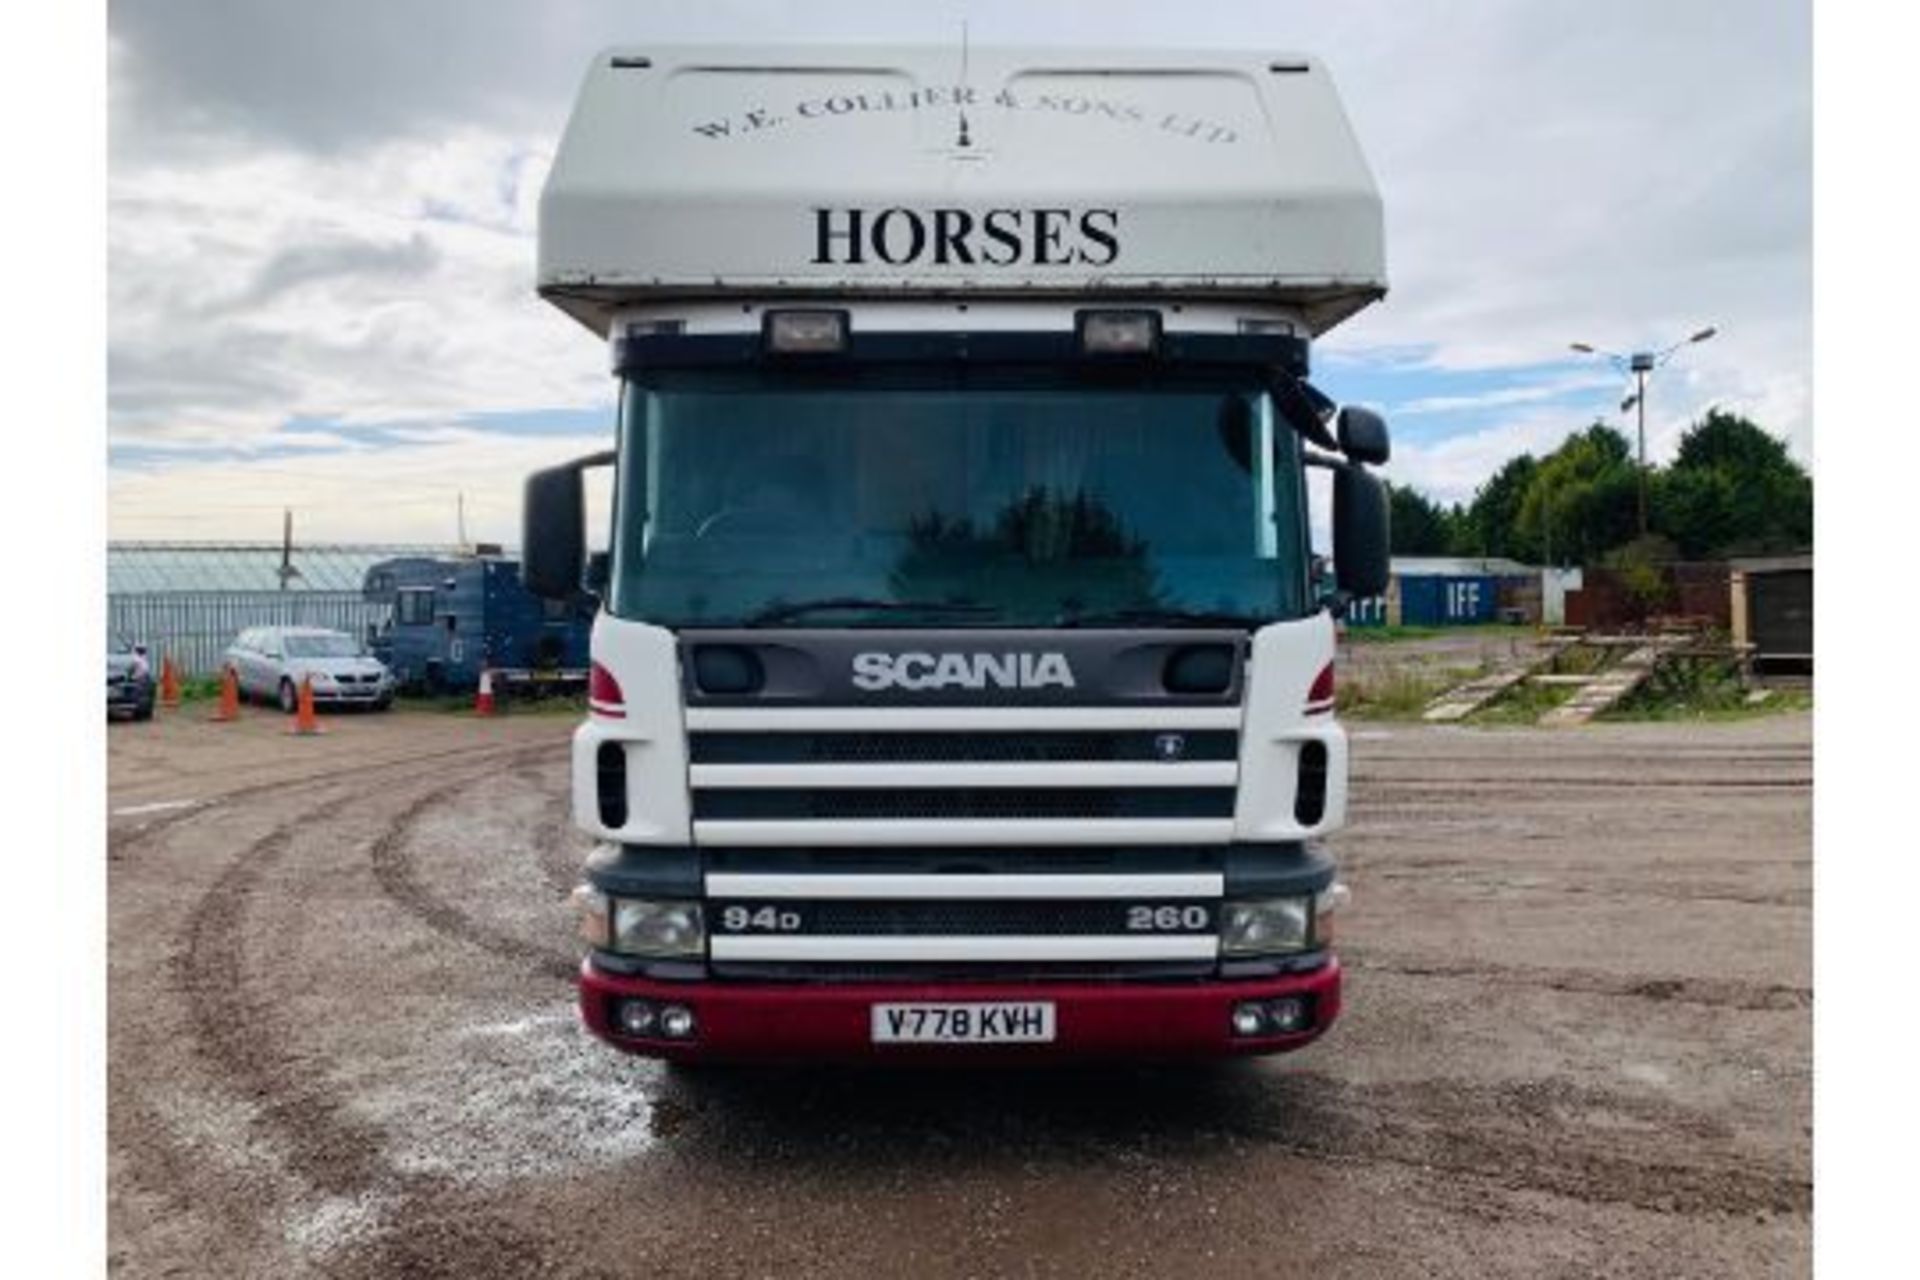 Scania 94D 260 'George Smith Built' Horsebox 2000 Reg - TOP SPEC - Carries 4/6 Horses - Image 2 of 28